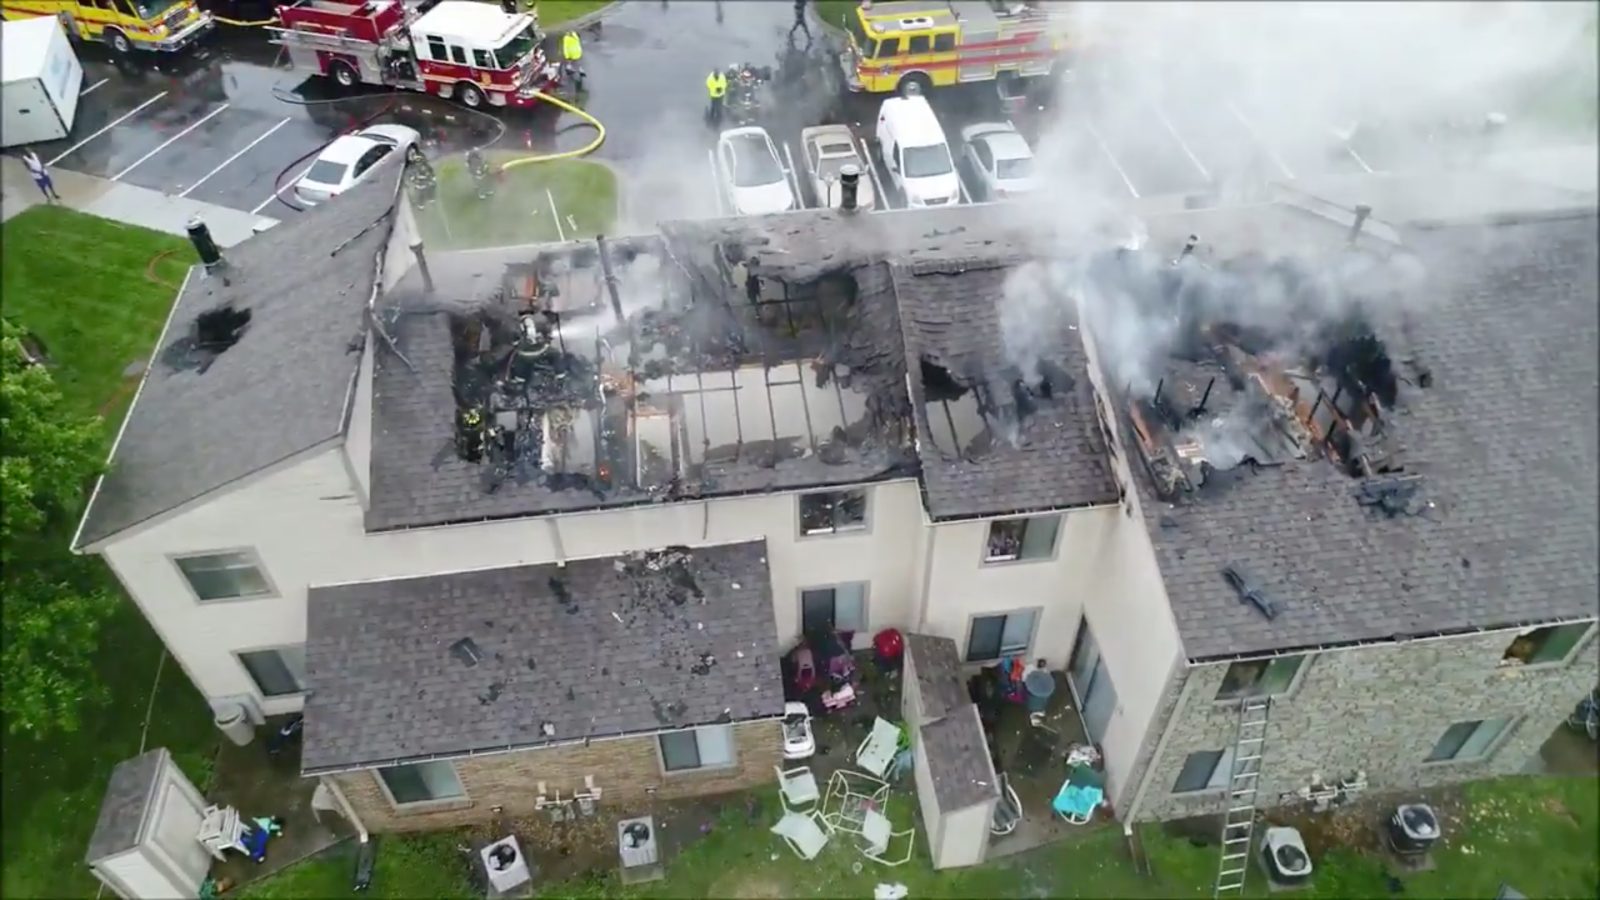 Fire Department Flies Dji Matrice 210 Drone For The First Time